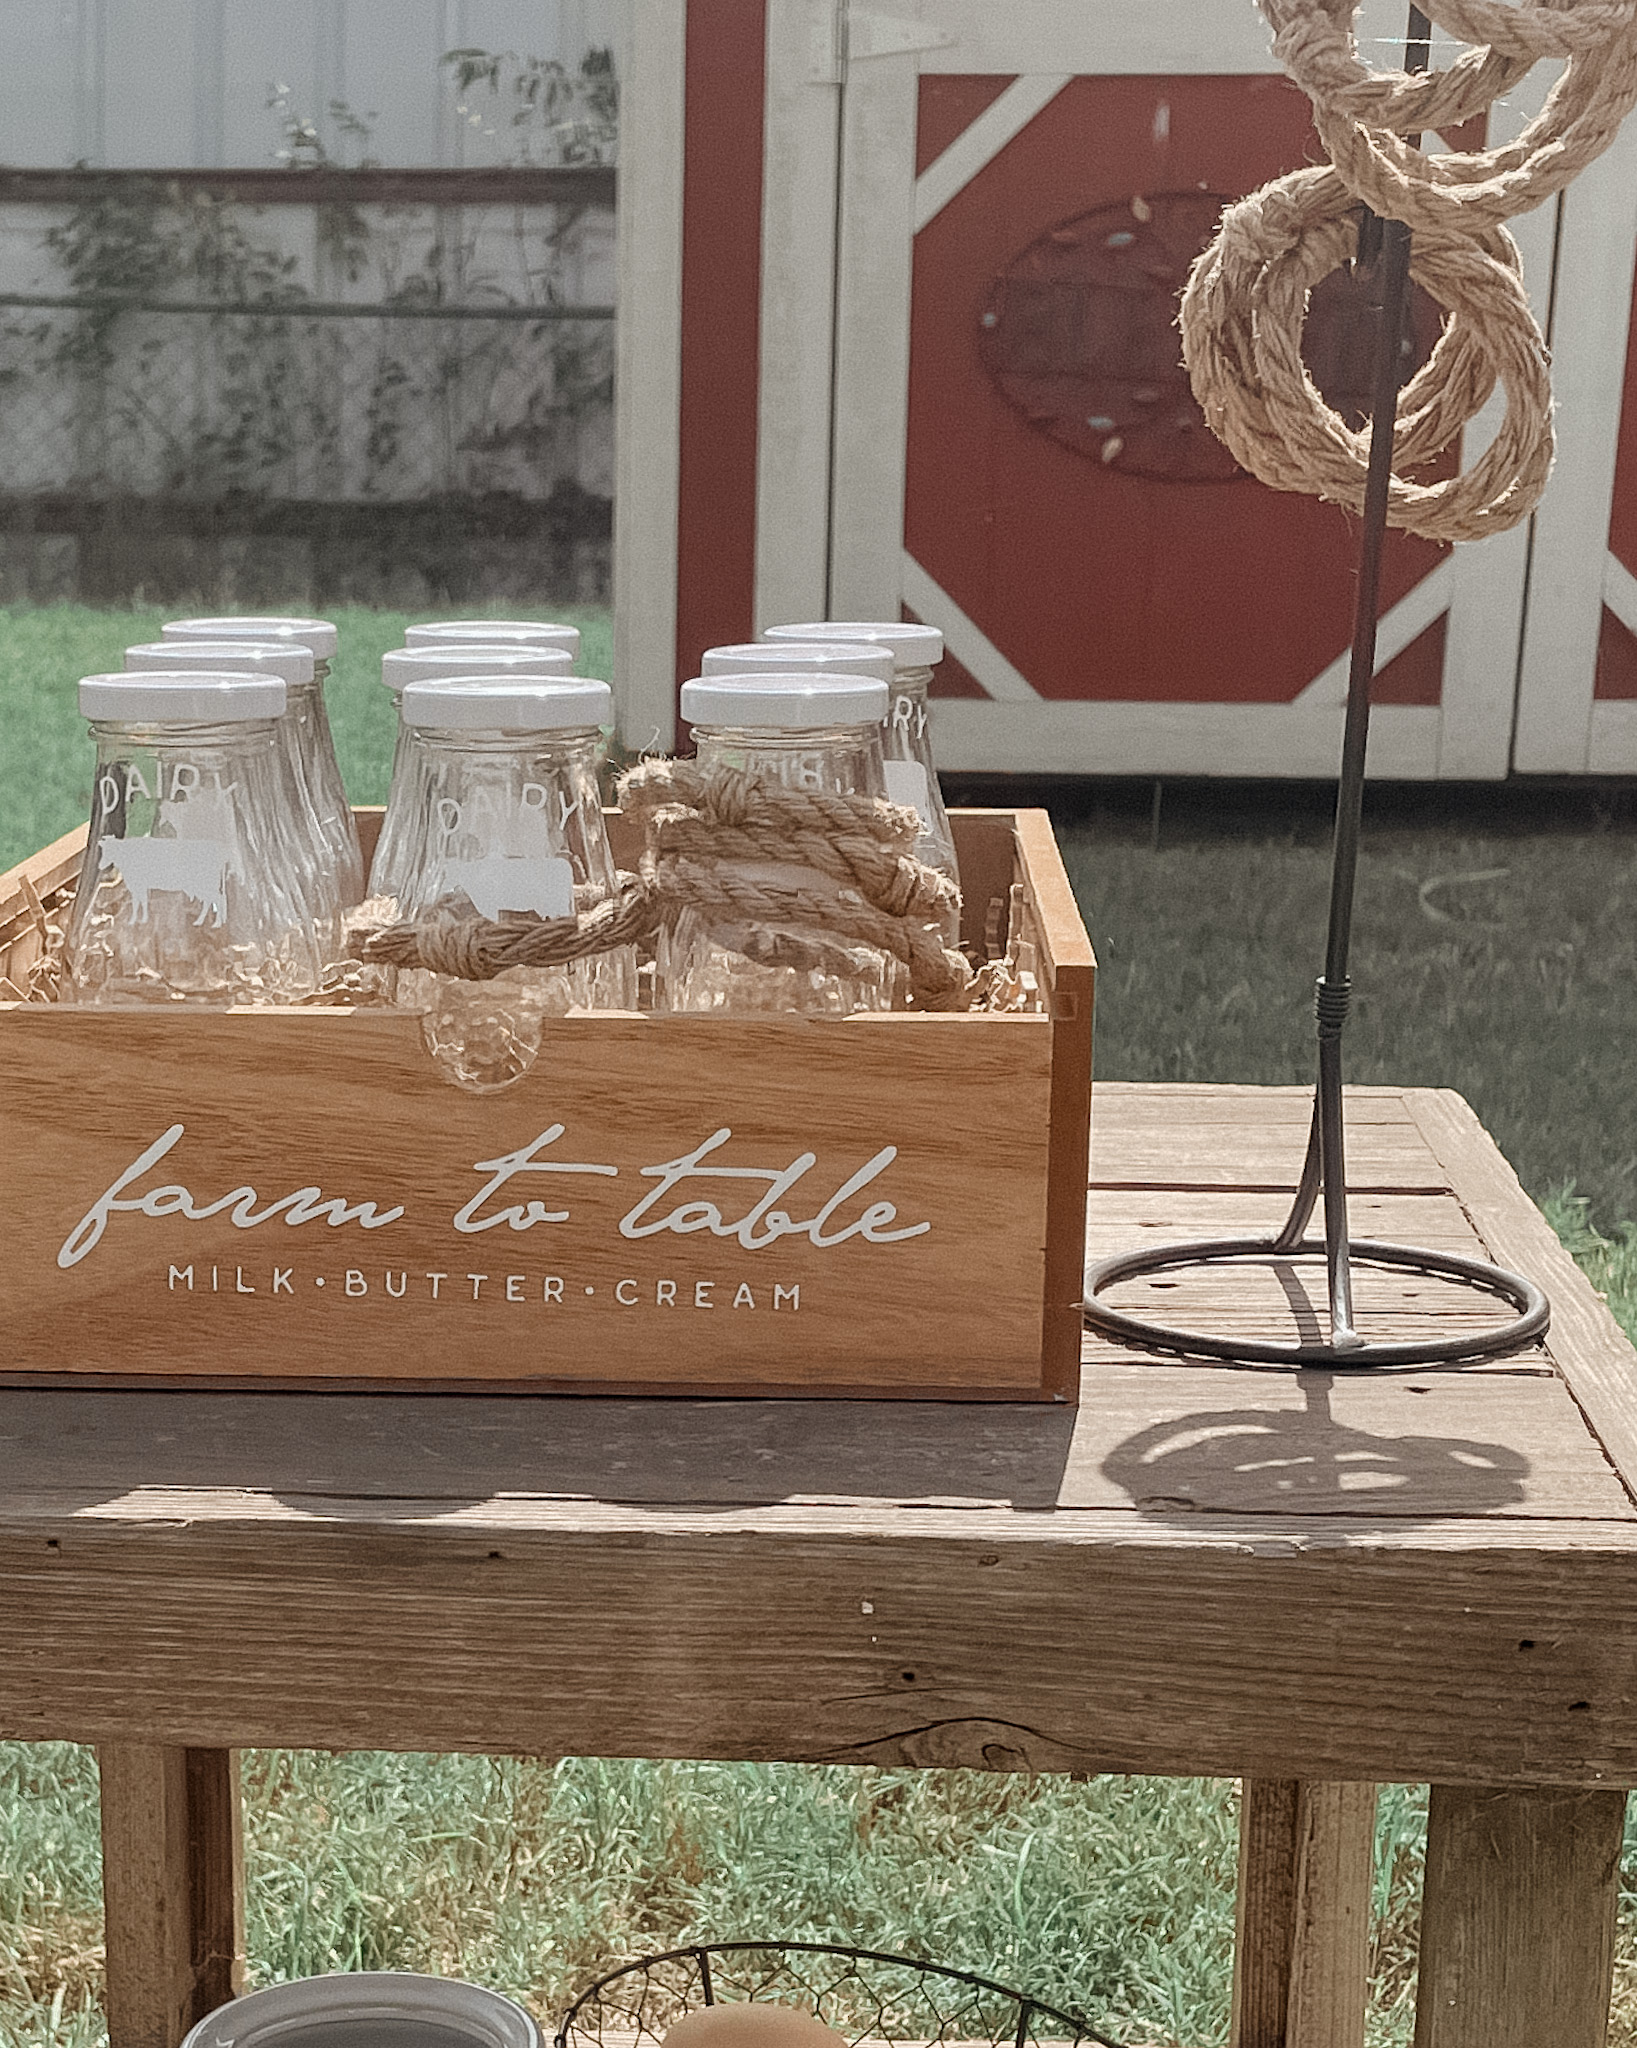 farmers market party activities, games and more! dairy farm ring toss with milk bottles
